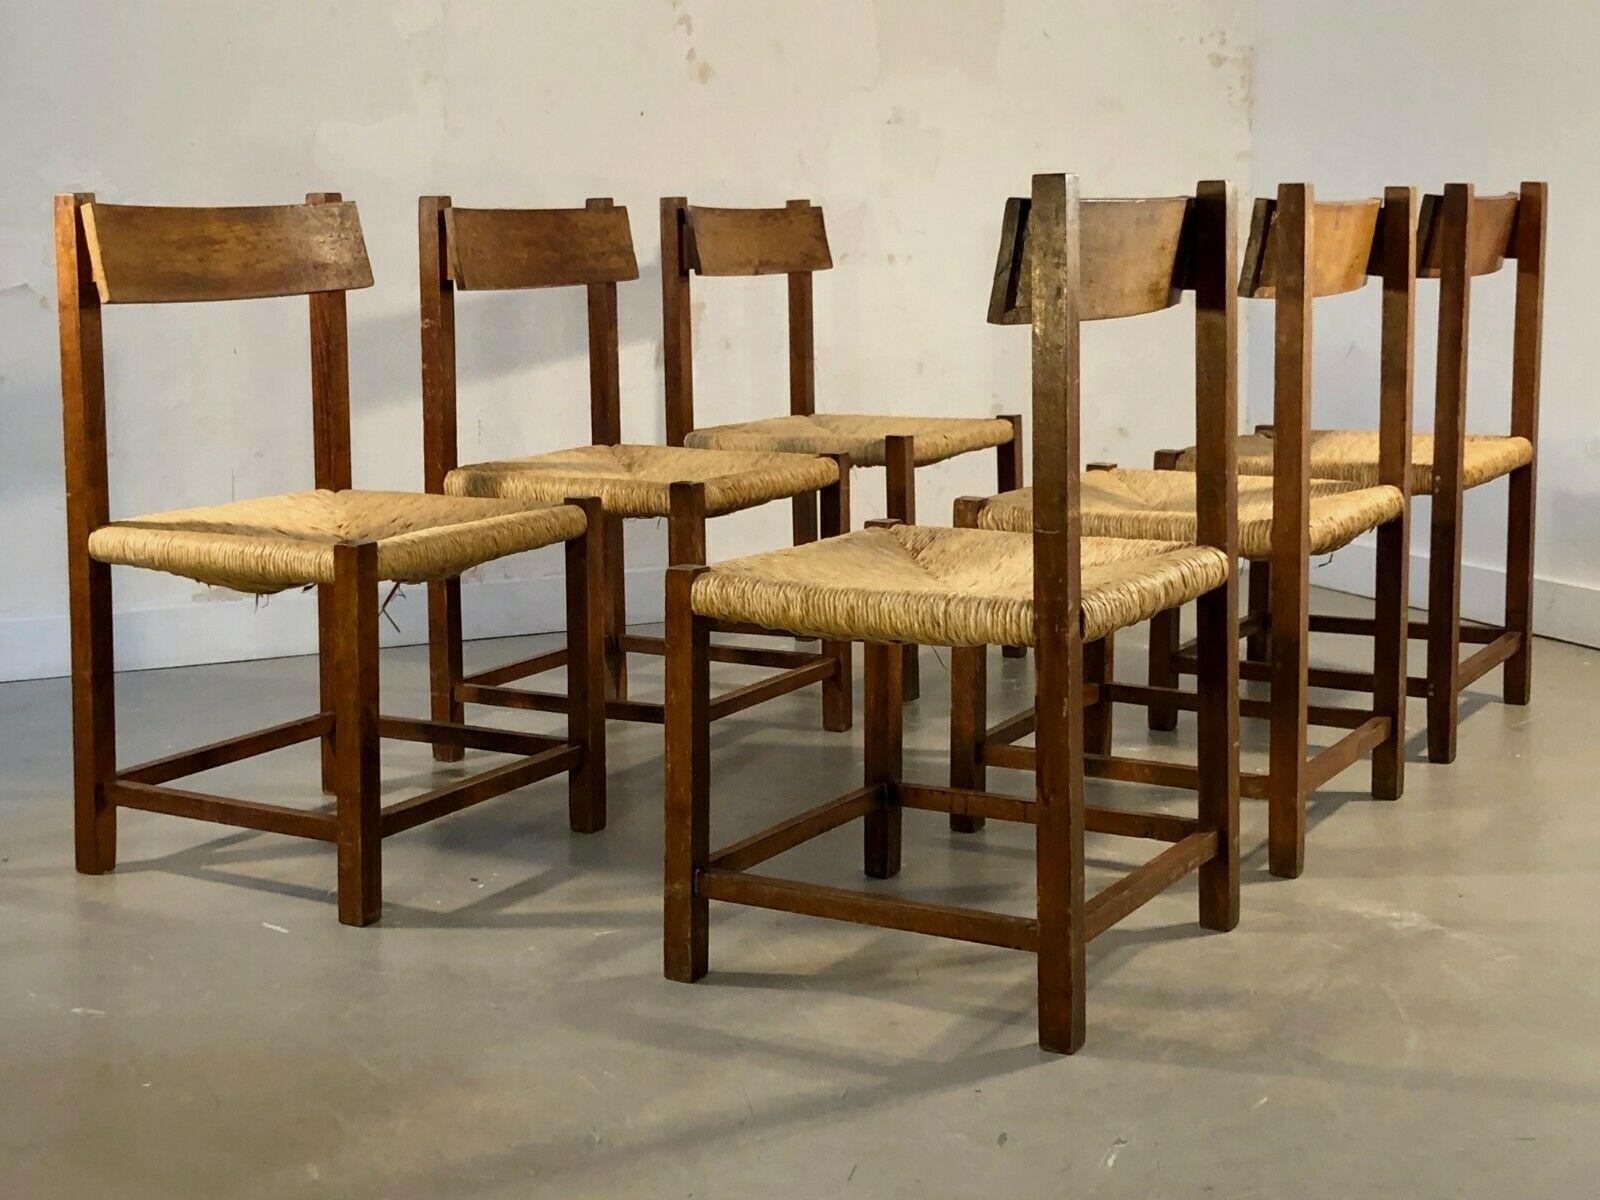 Mid-20th Century A Set of 6 Rustic Chairs, to be attributed, France 1950